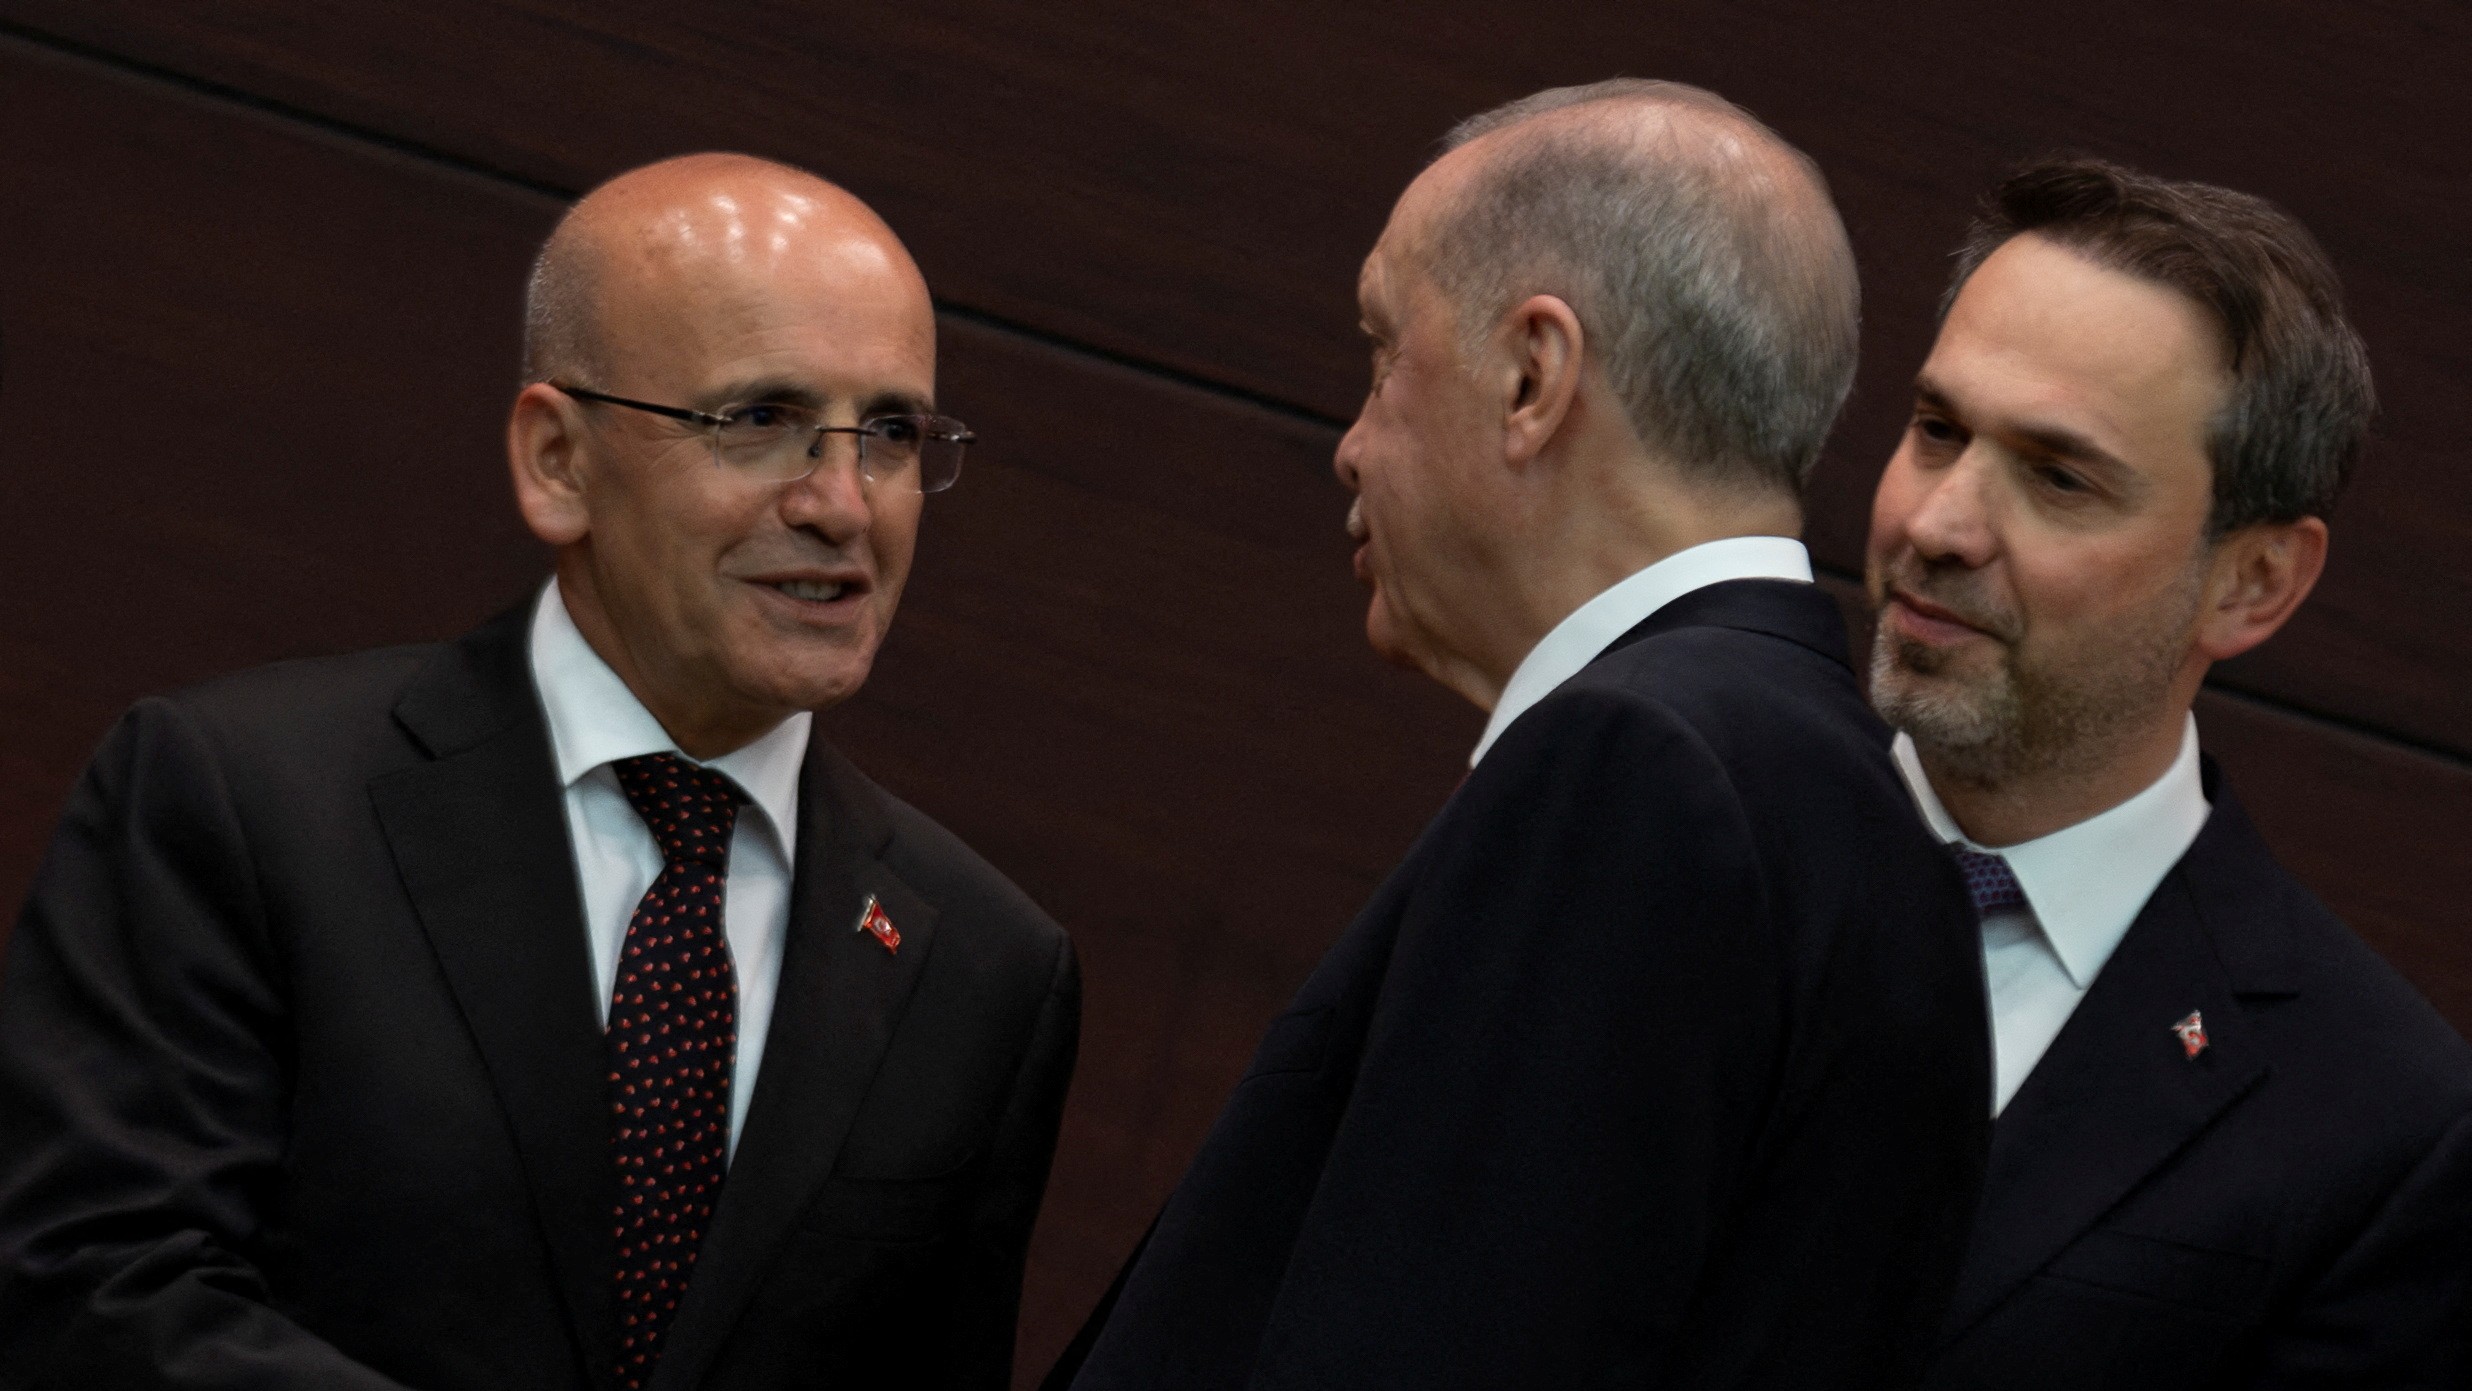 Turkish President Recep Tayyip Erdogan shakes hands with the new Treasury and Finance Minister Mehmet Simsek on 3 June (Reuters)